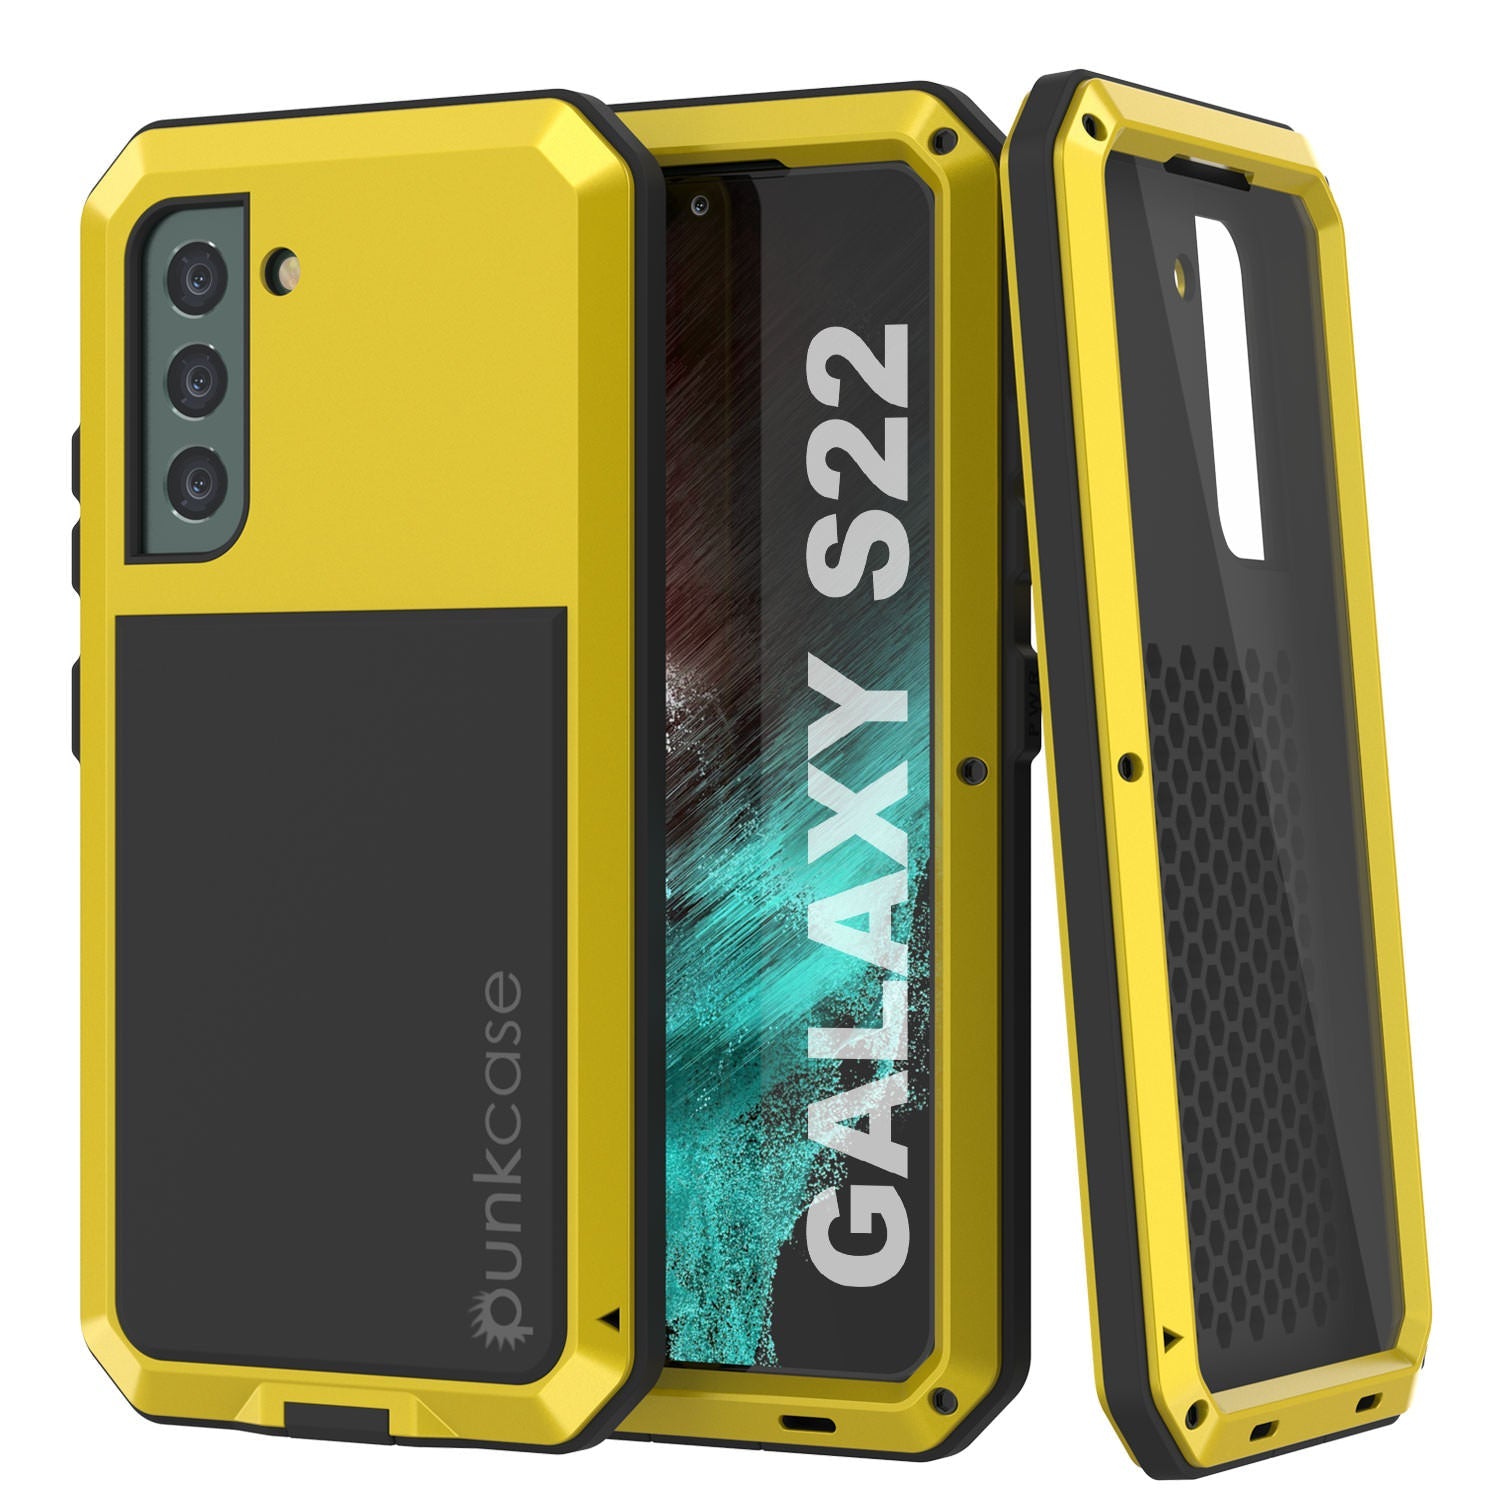 Galaxy S22 Metal Case, Heavy Duty Military Grade Rugged Armor Cover [Neon]